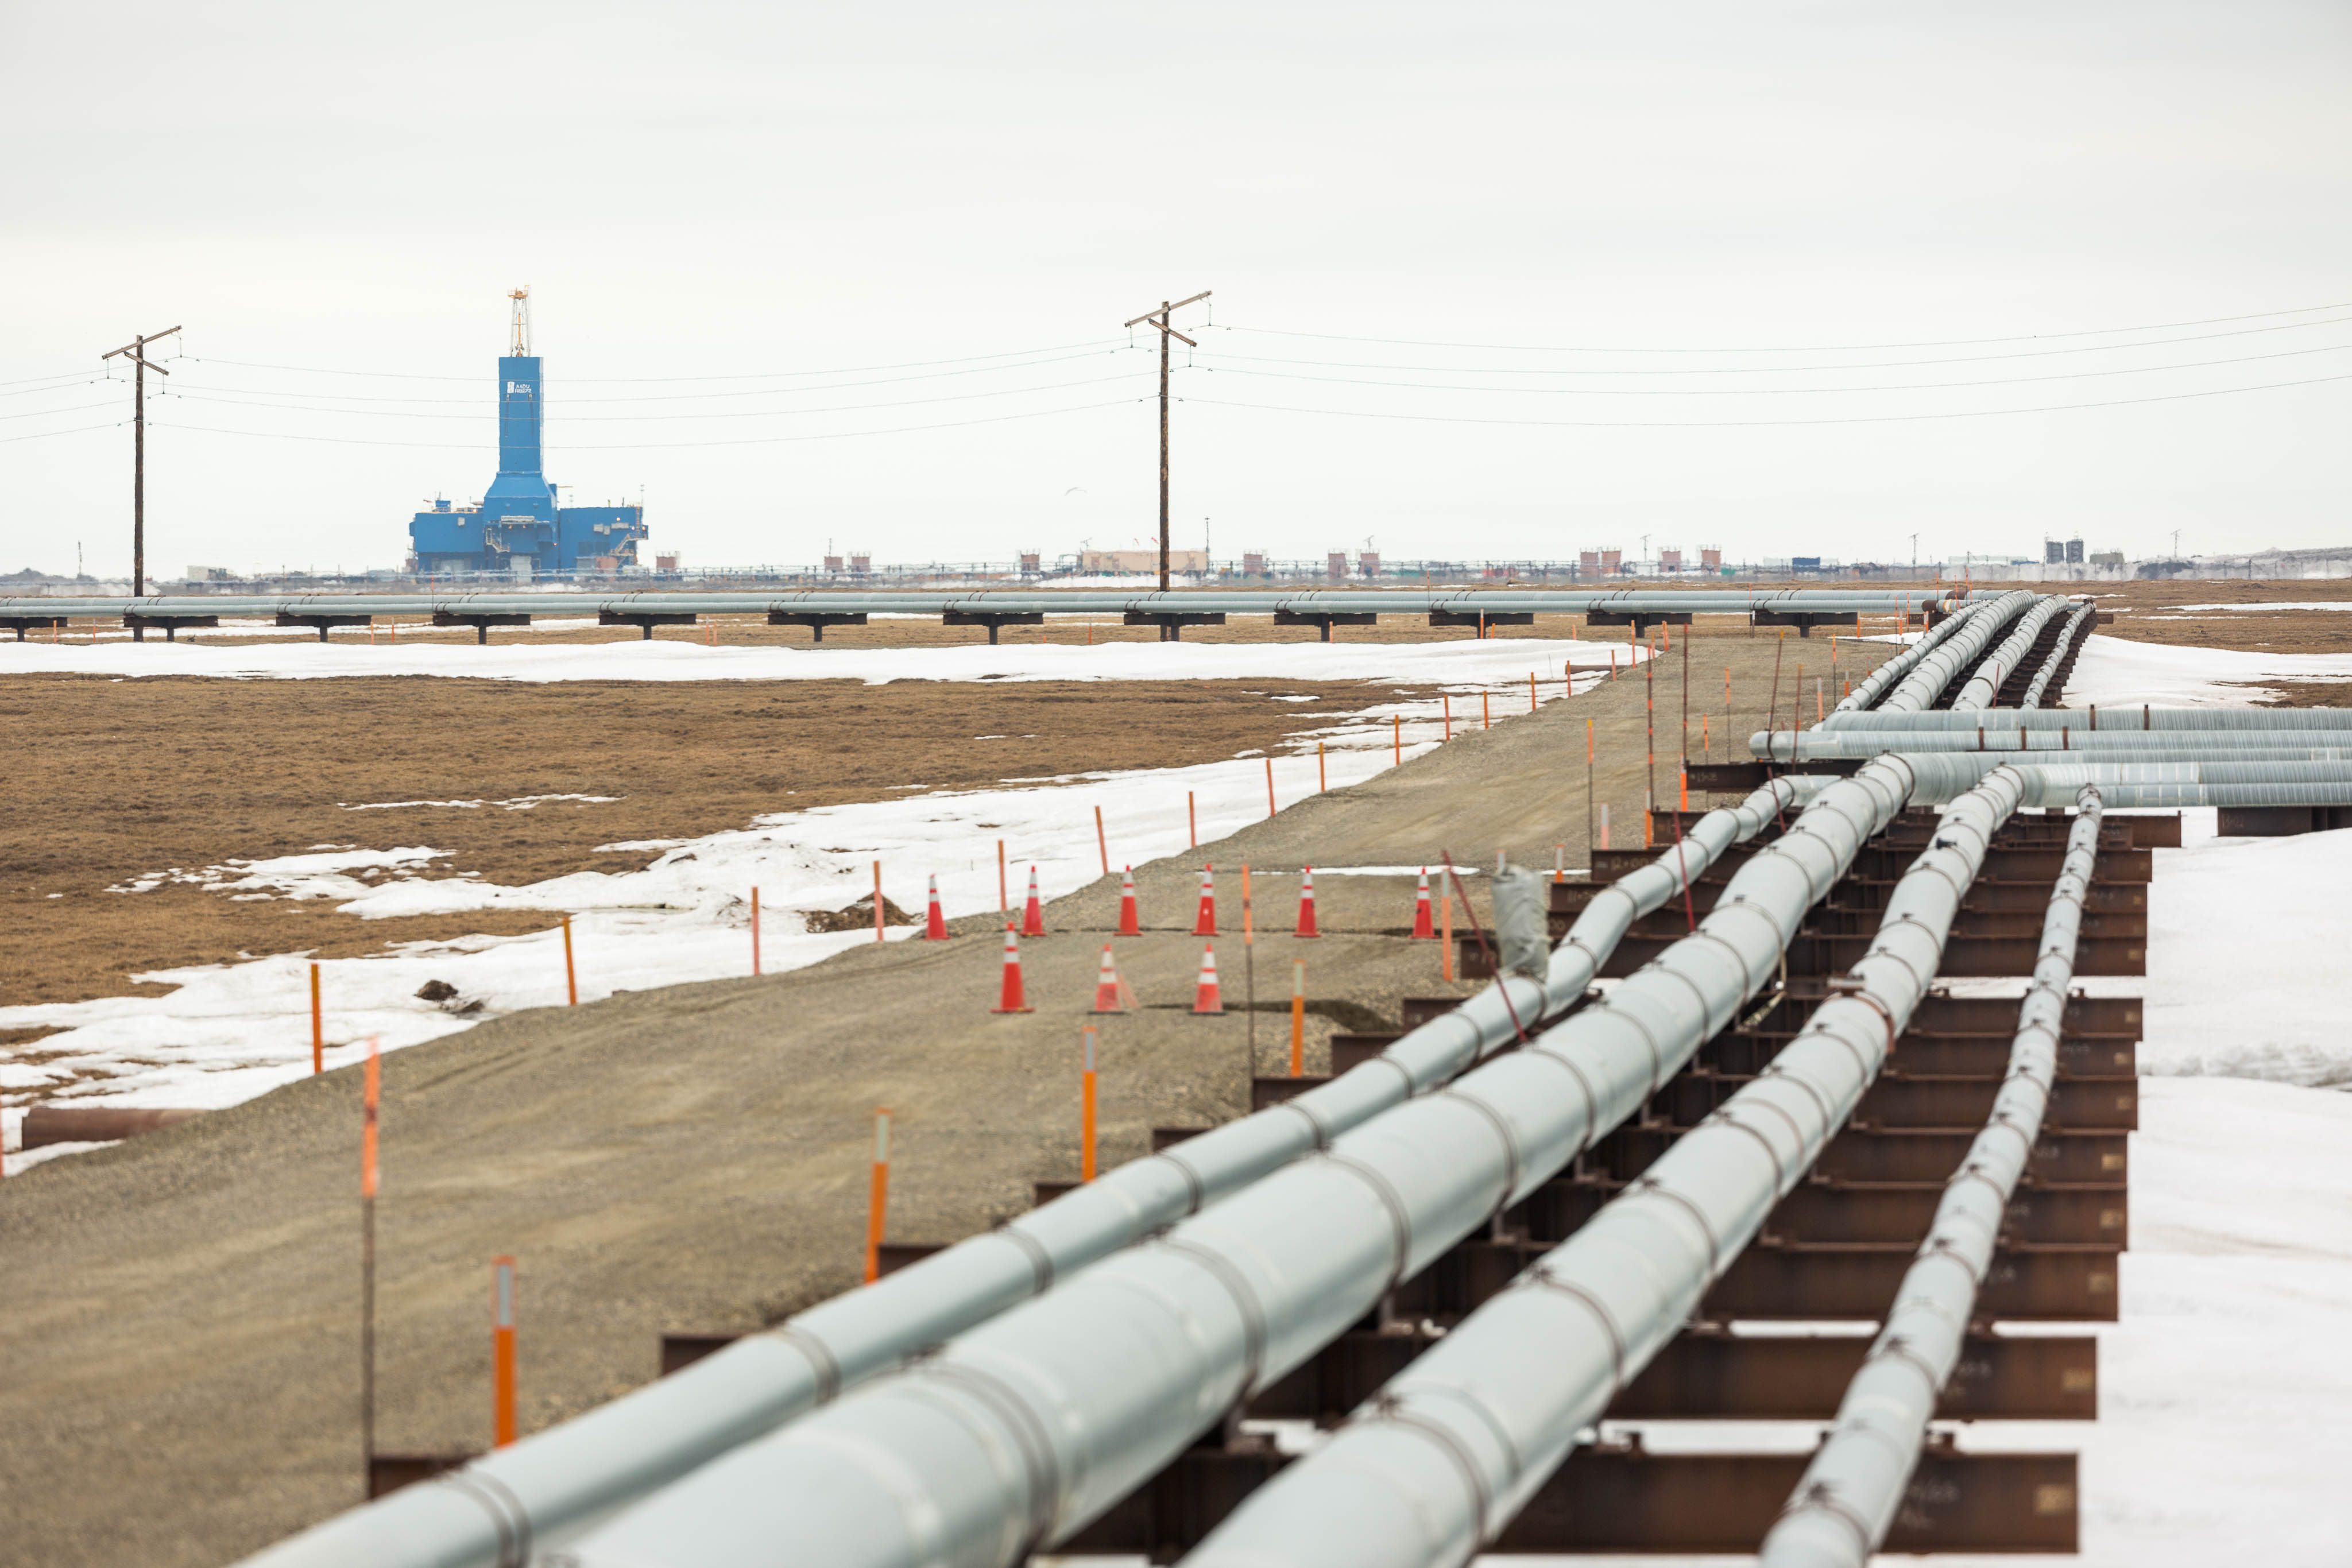 BP's Parker Rig 272, viewed from the Lisburne Production Center in Prudhoe Bay on Friday, May 22, 2015. (Loren Holmes / Alaska Dispatch News)